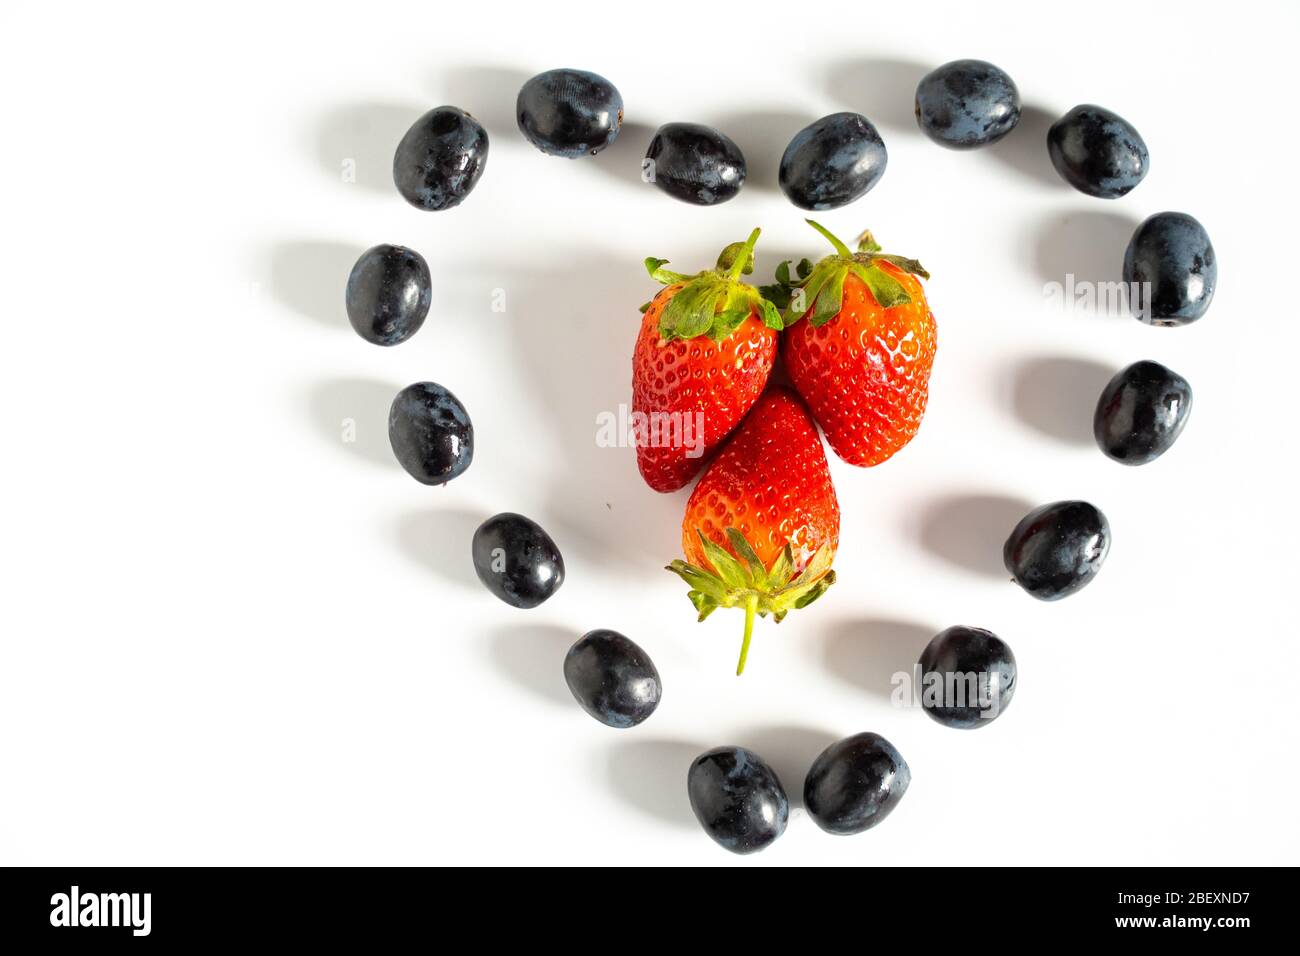 Black grapes laid out in the shape of a love heart with three strawberries in the center against a plain white background Stock Photo